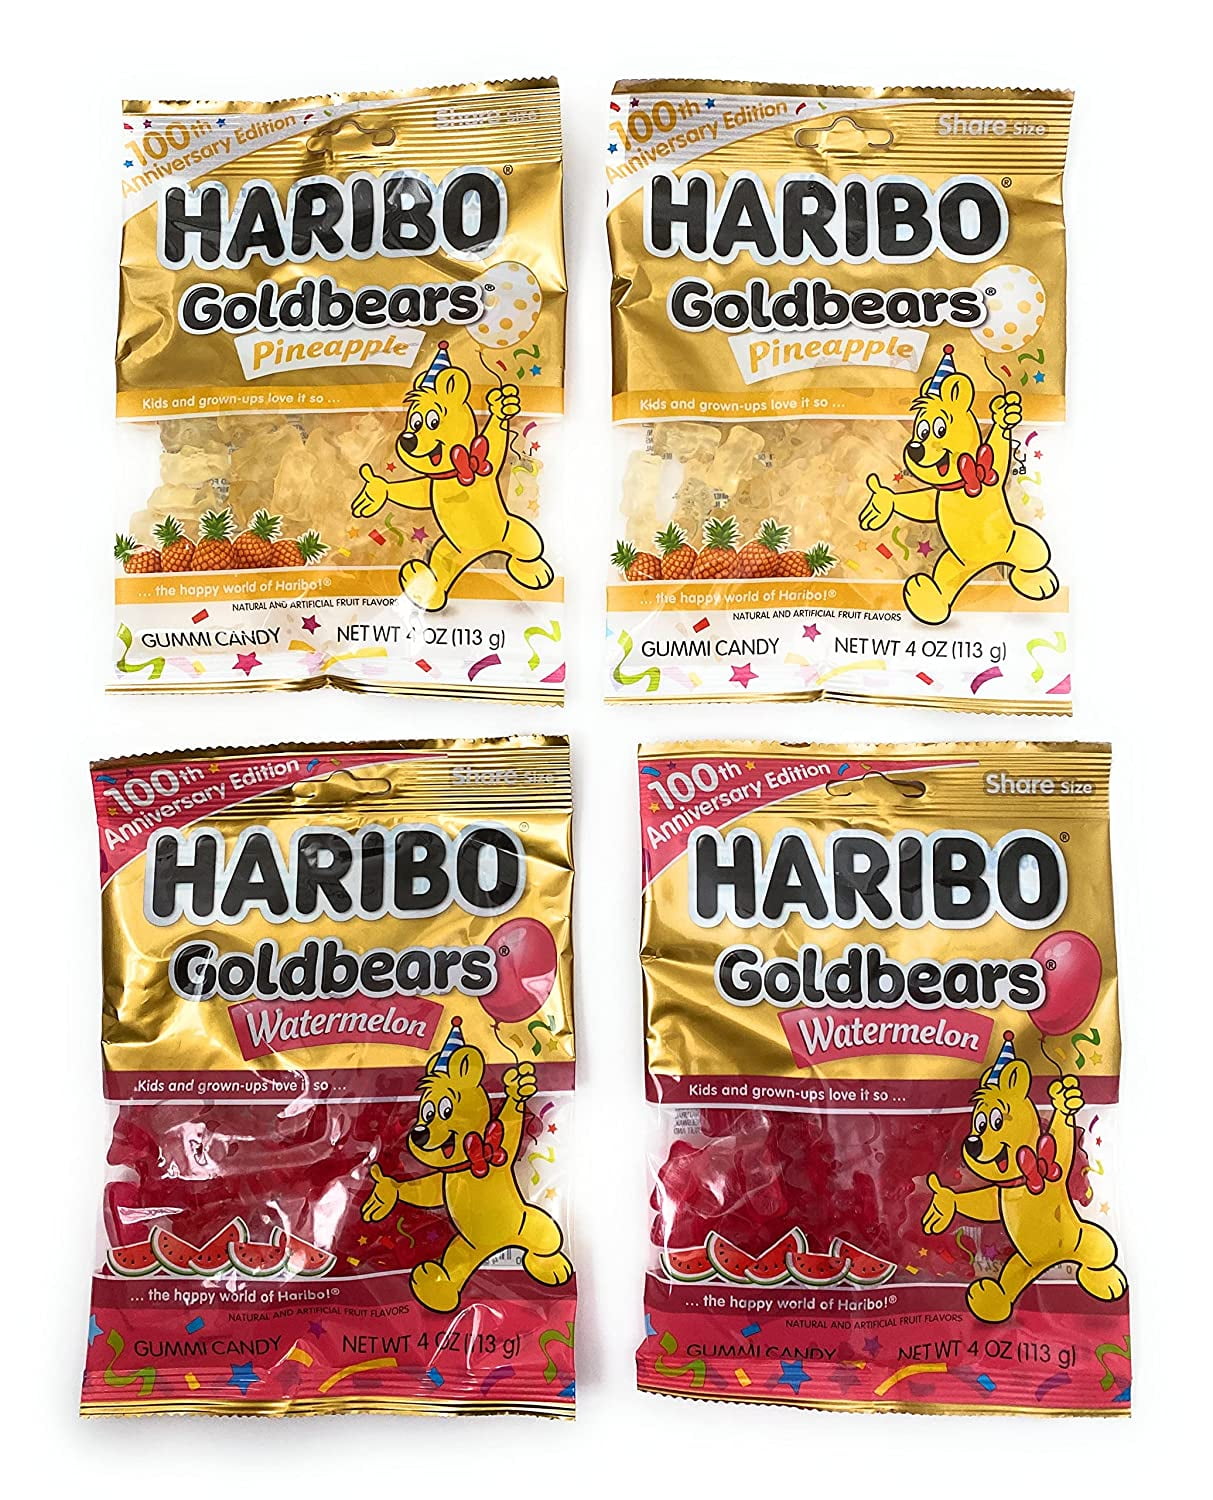 Haribo Roulettes Gummy Candy Rolls (Innerpack of 36)